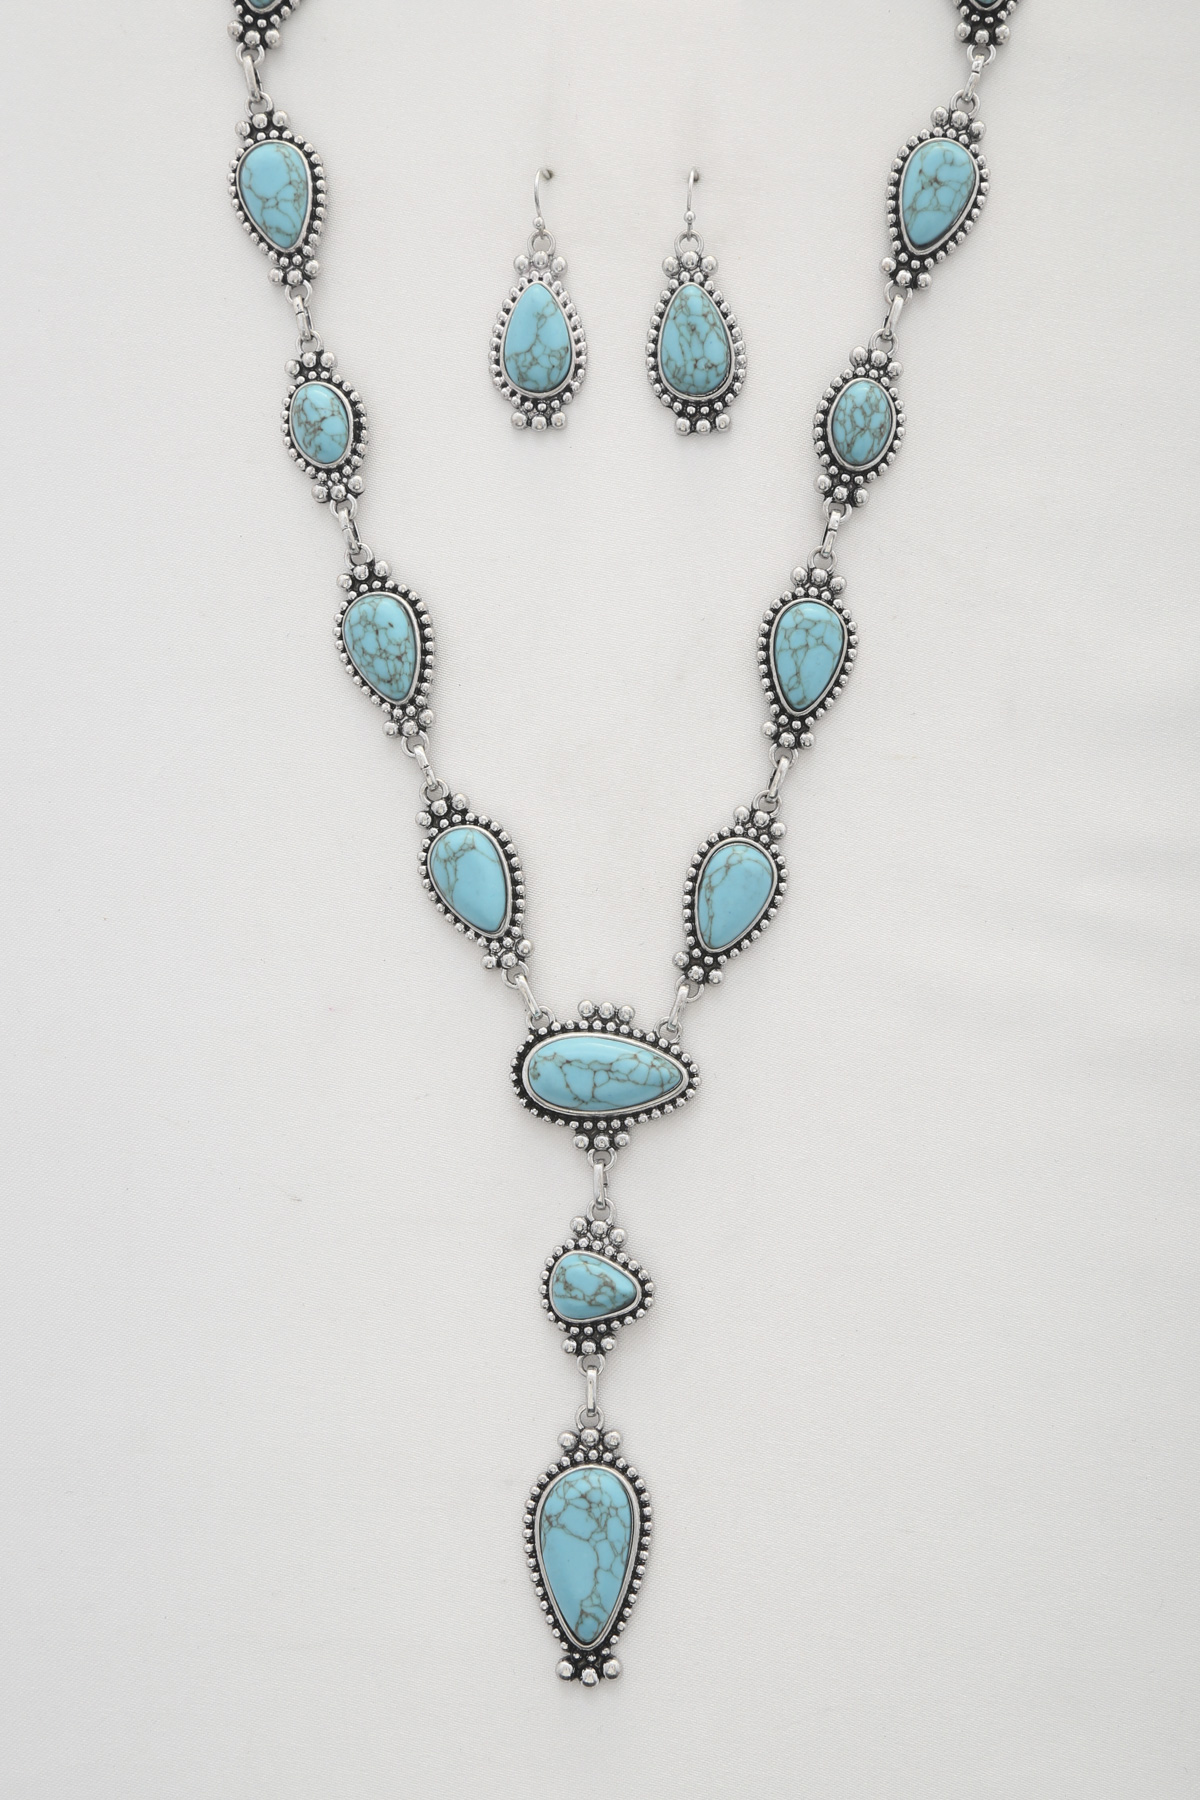 WESTERN TURQUOISE METAL NECKLACE